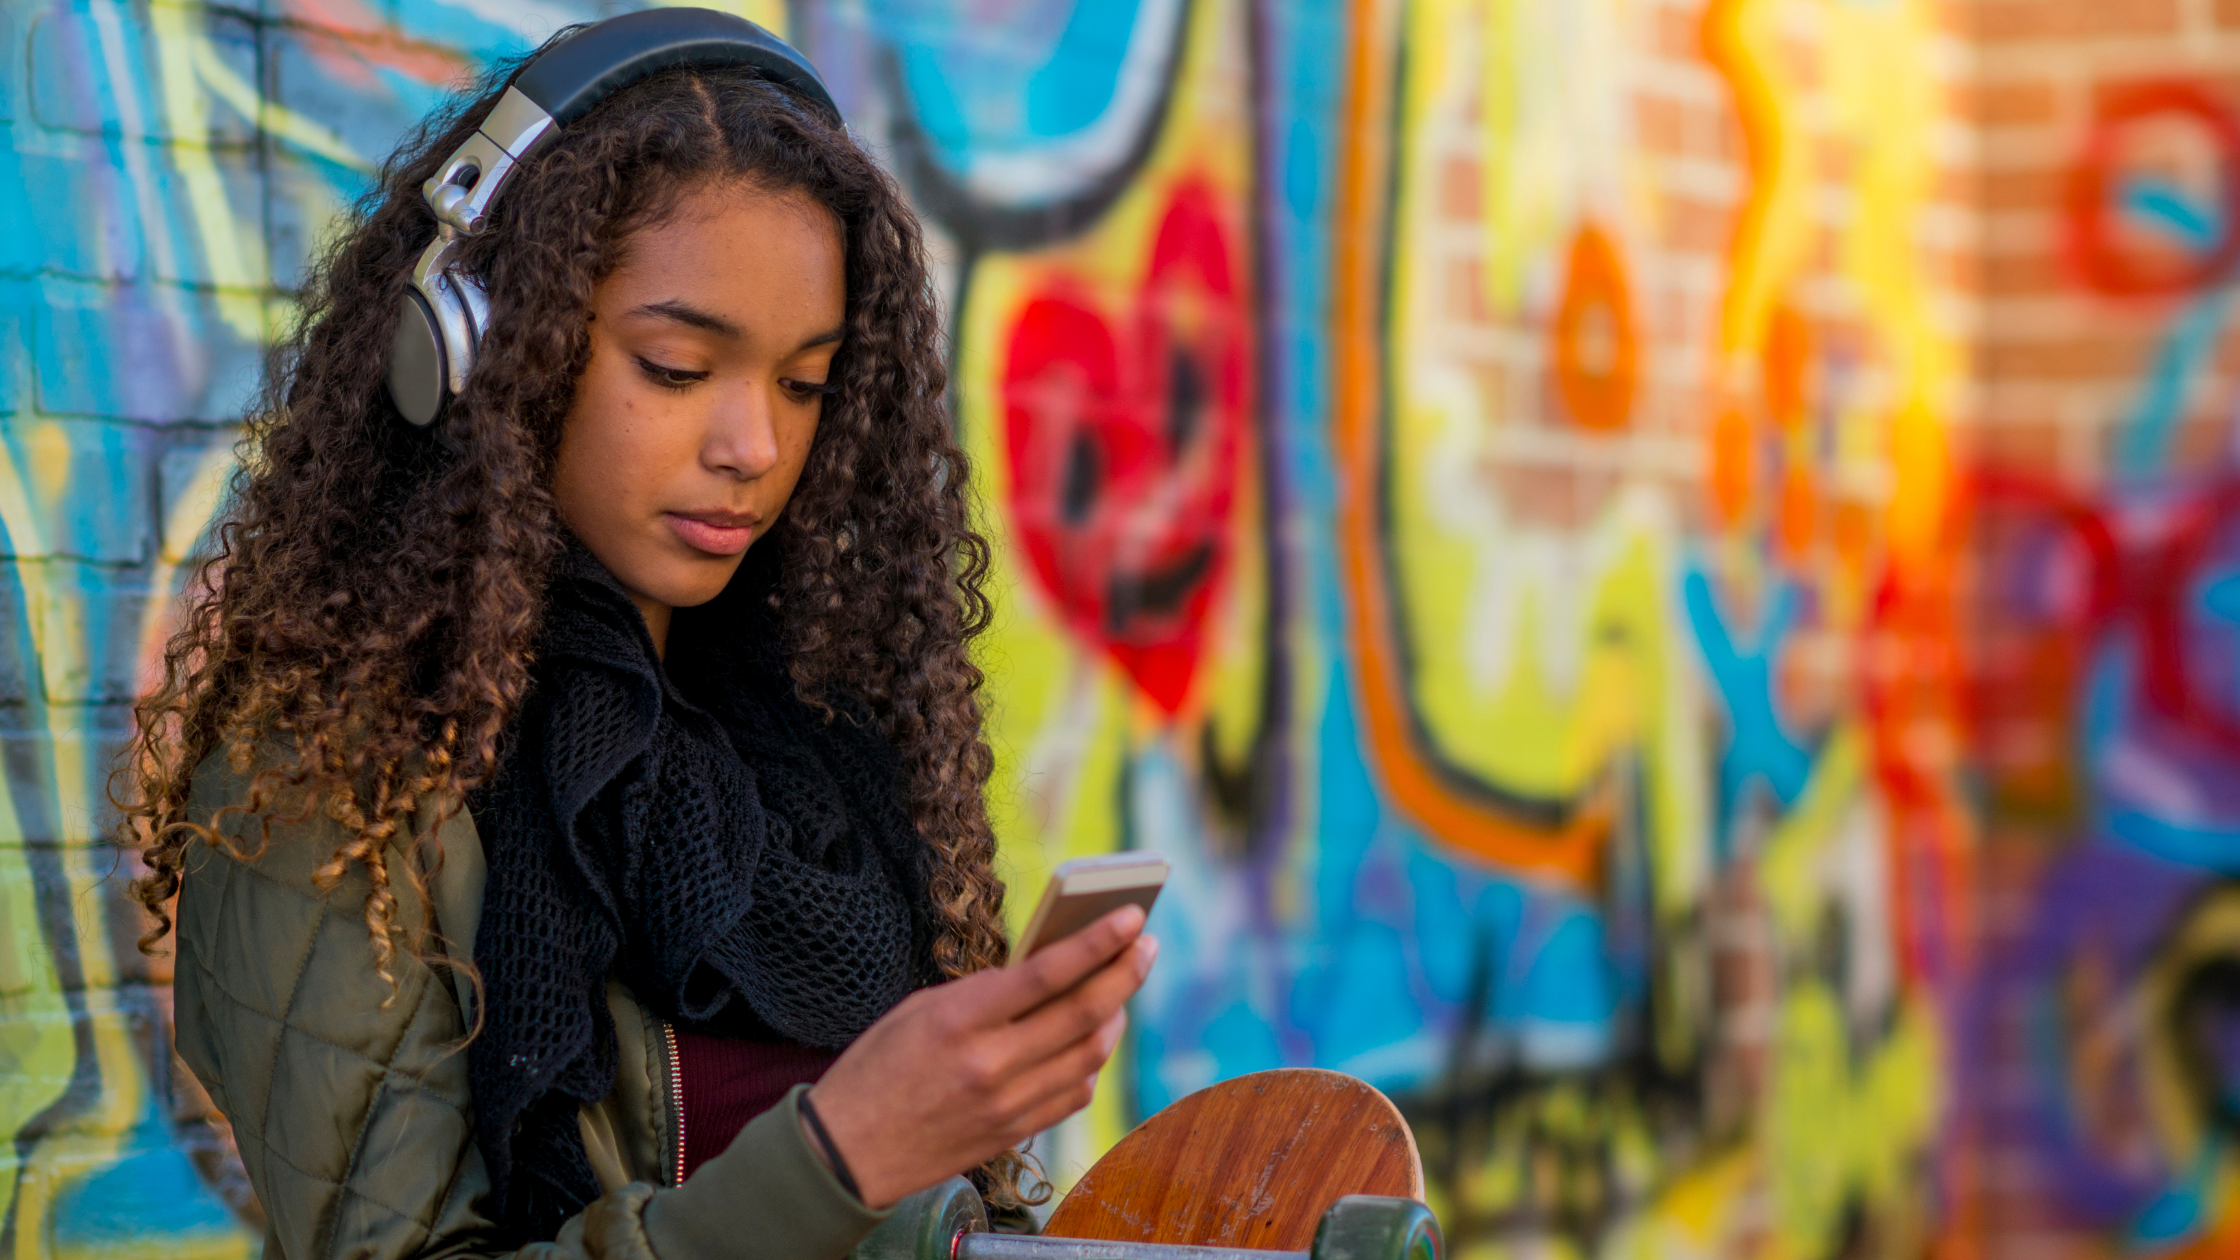 A young female looks at her phone as she listens to music on headphones, she leans against a vibrantly colored mural on a brick wall